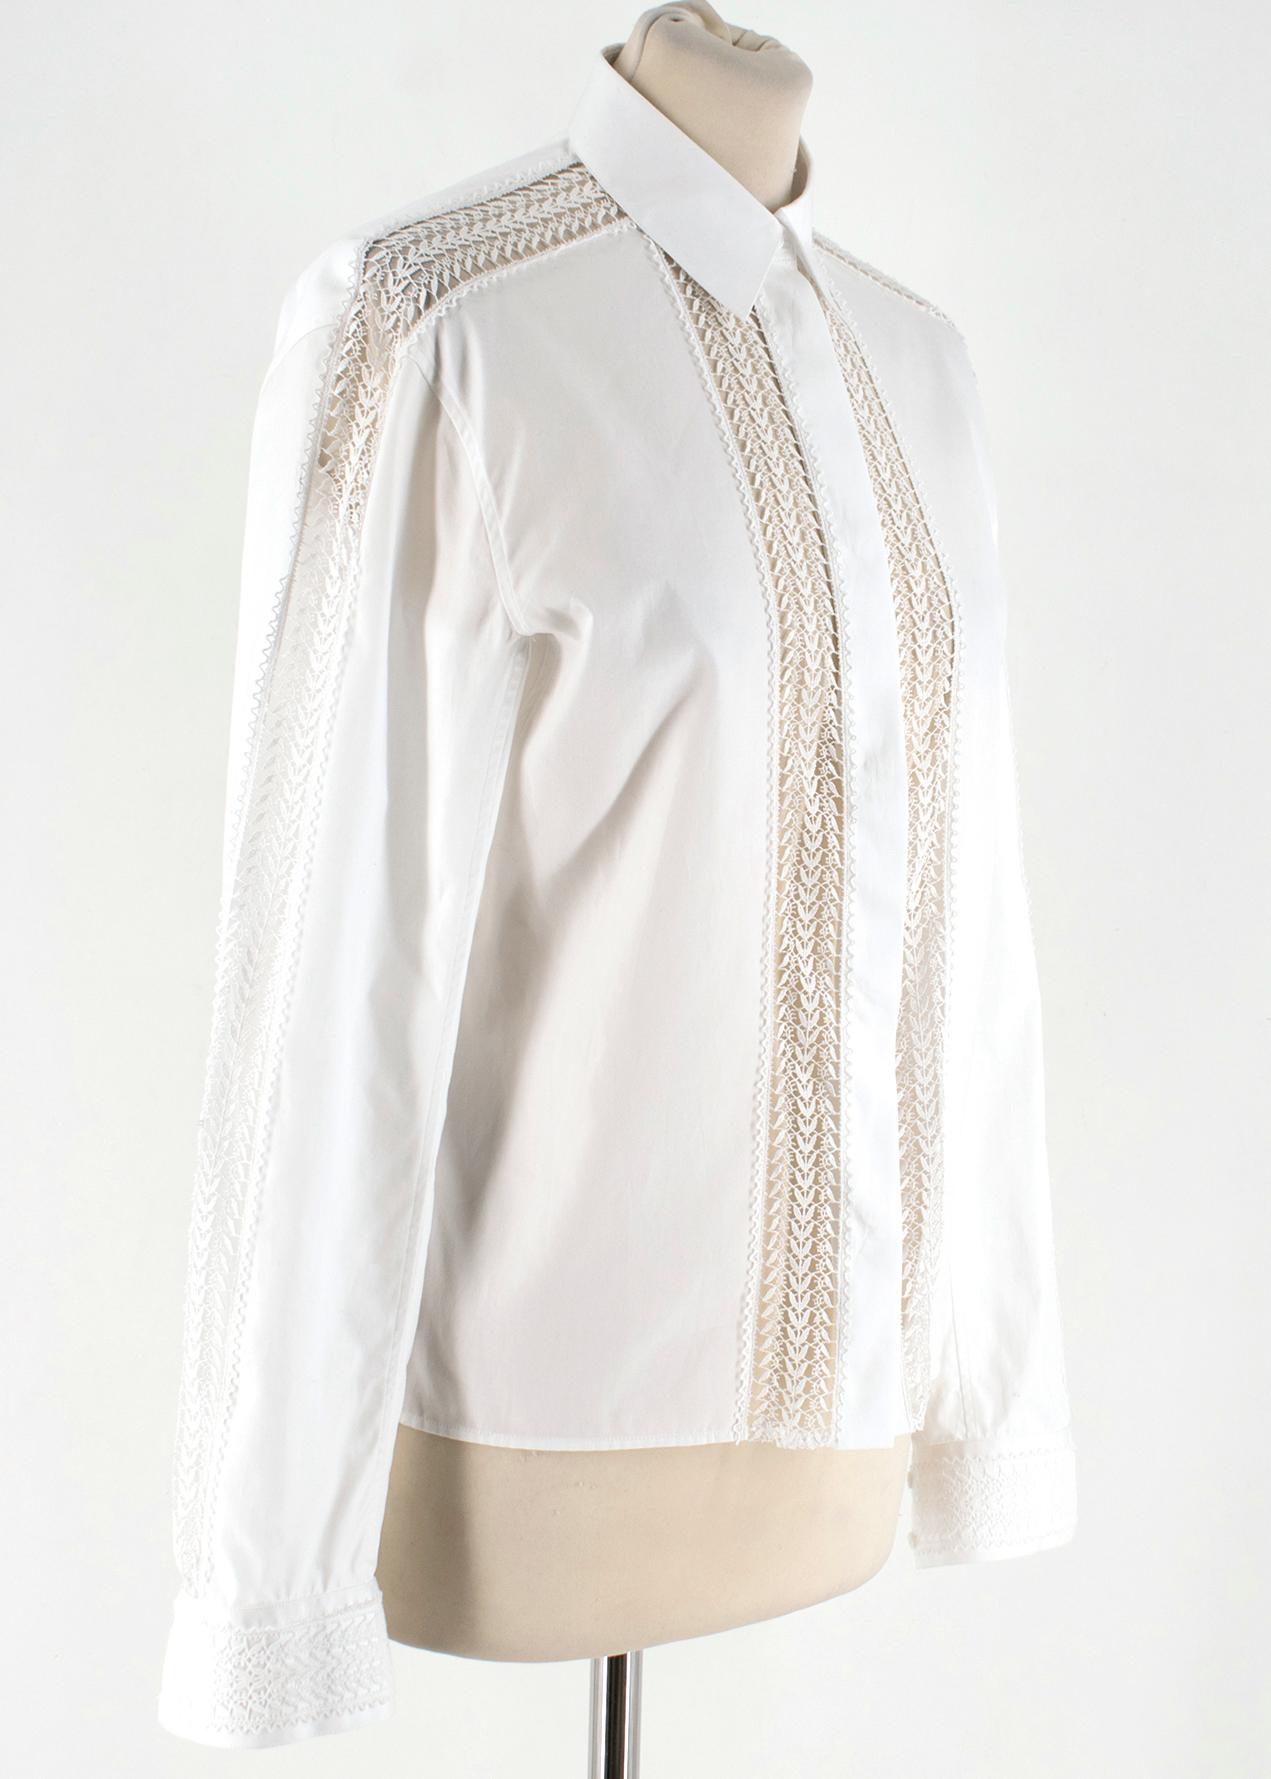 Alaia White poplin shirt with detailing at front and on sleeves featuring button fastening.

- Made in Italy
- Dry clean only

Please note, these items are pre-owned and may show signs of
being stored even when unworn and unused. This is reflected